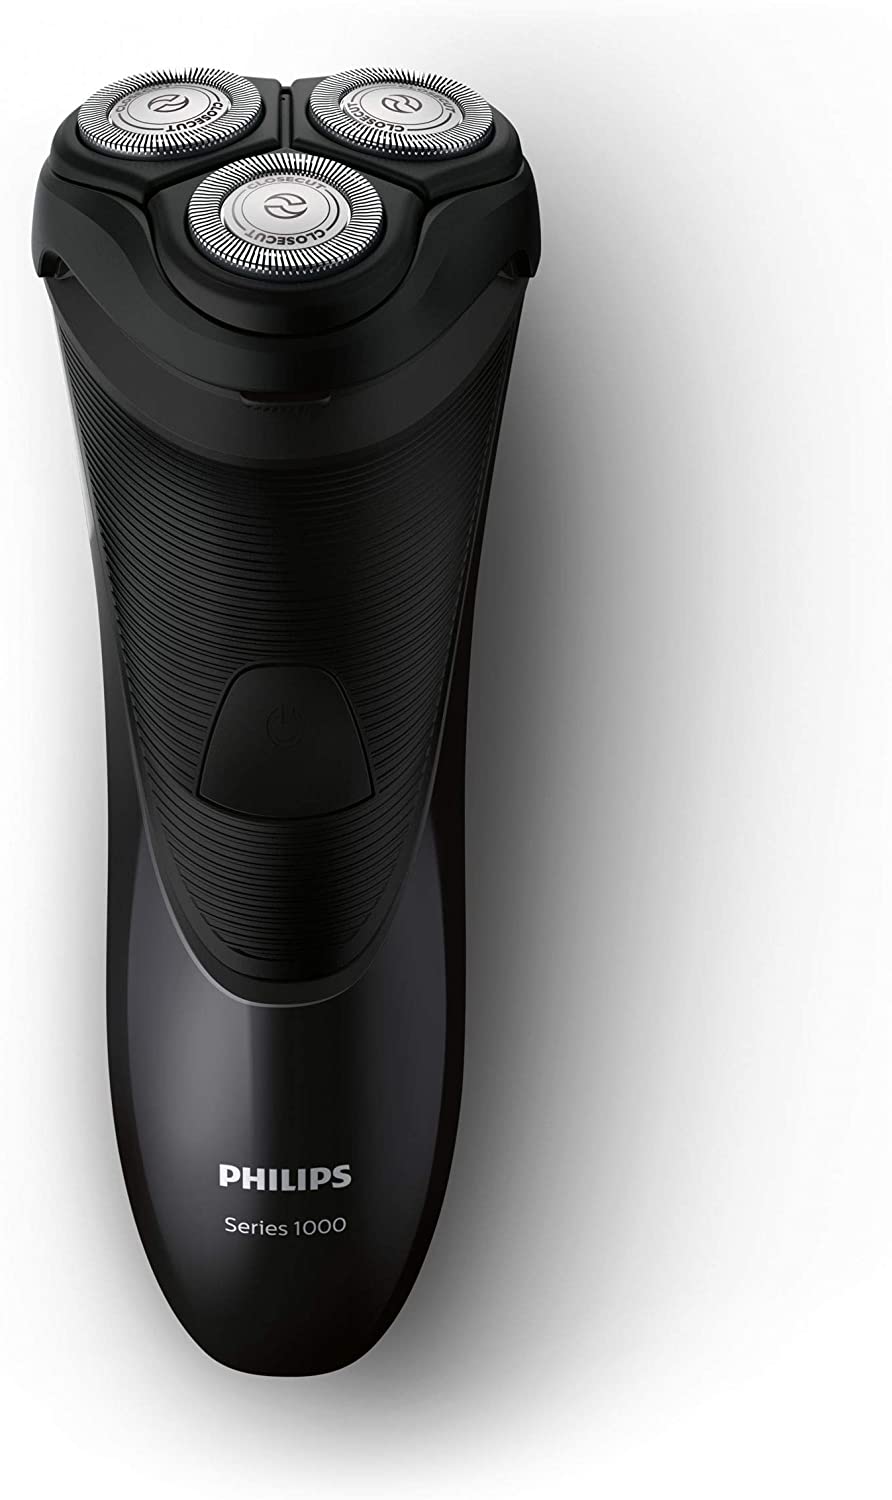 Philips Series 1000 Dry Electric Shaver Online in Bahrain - Halabh